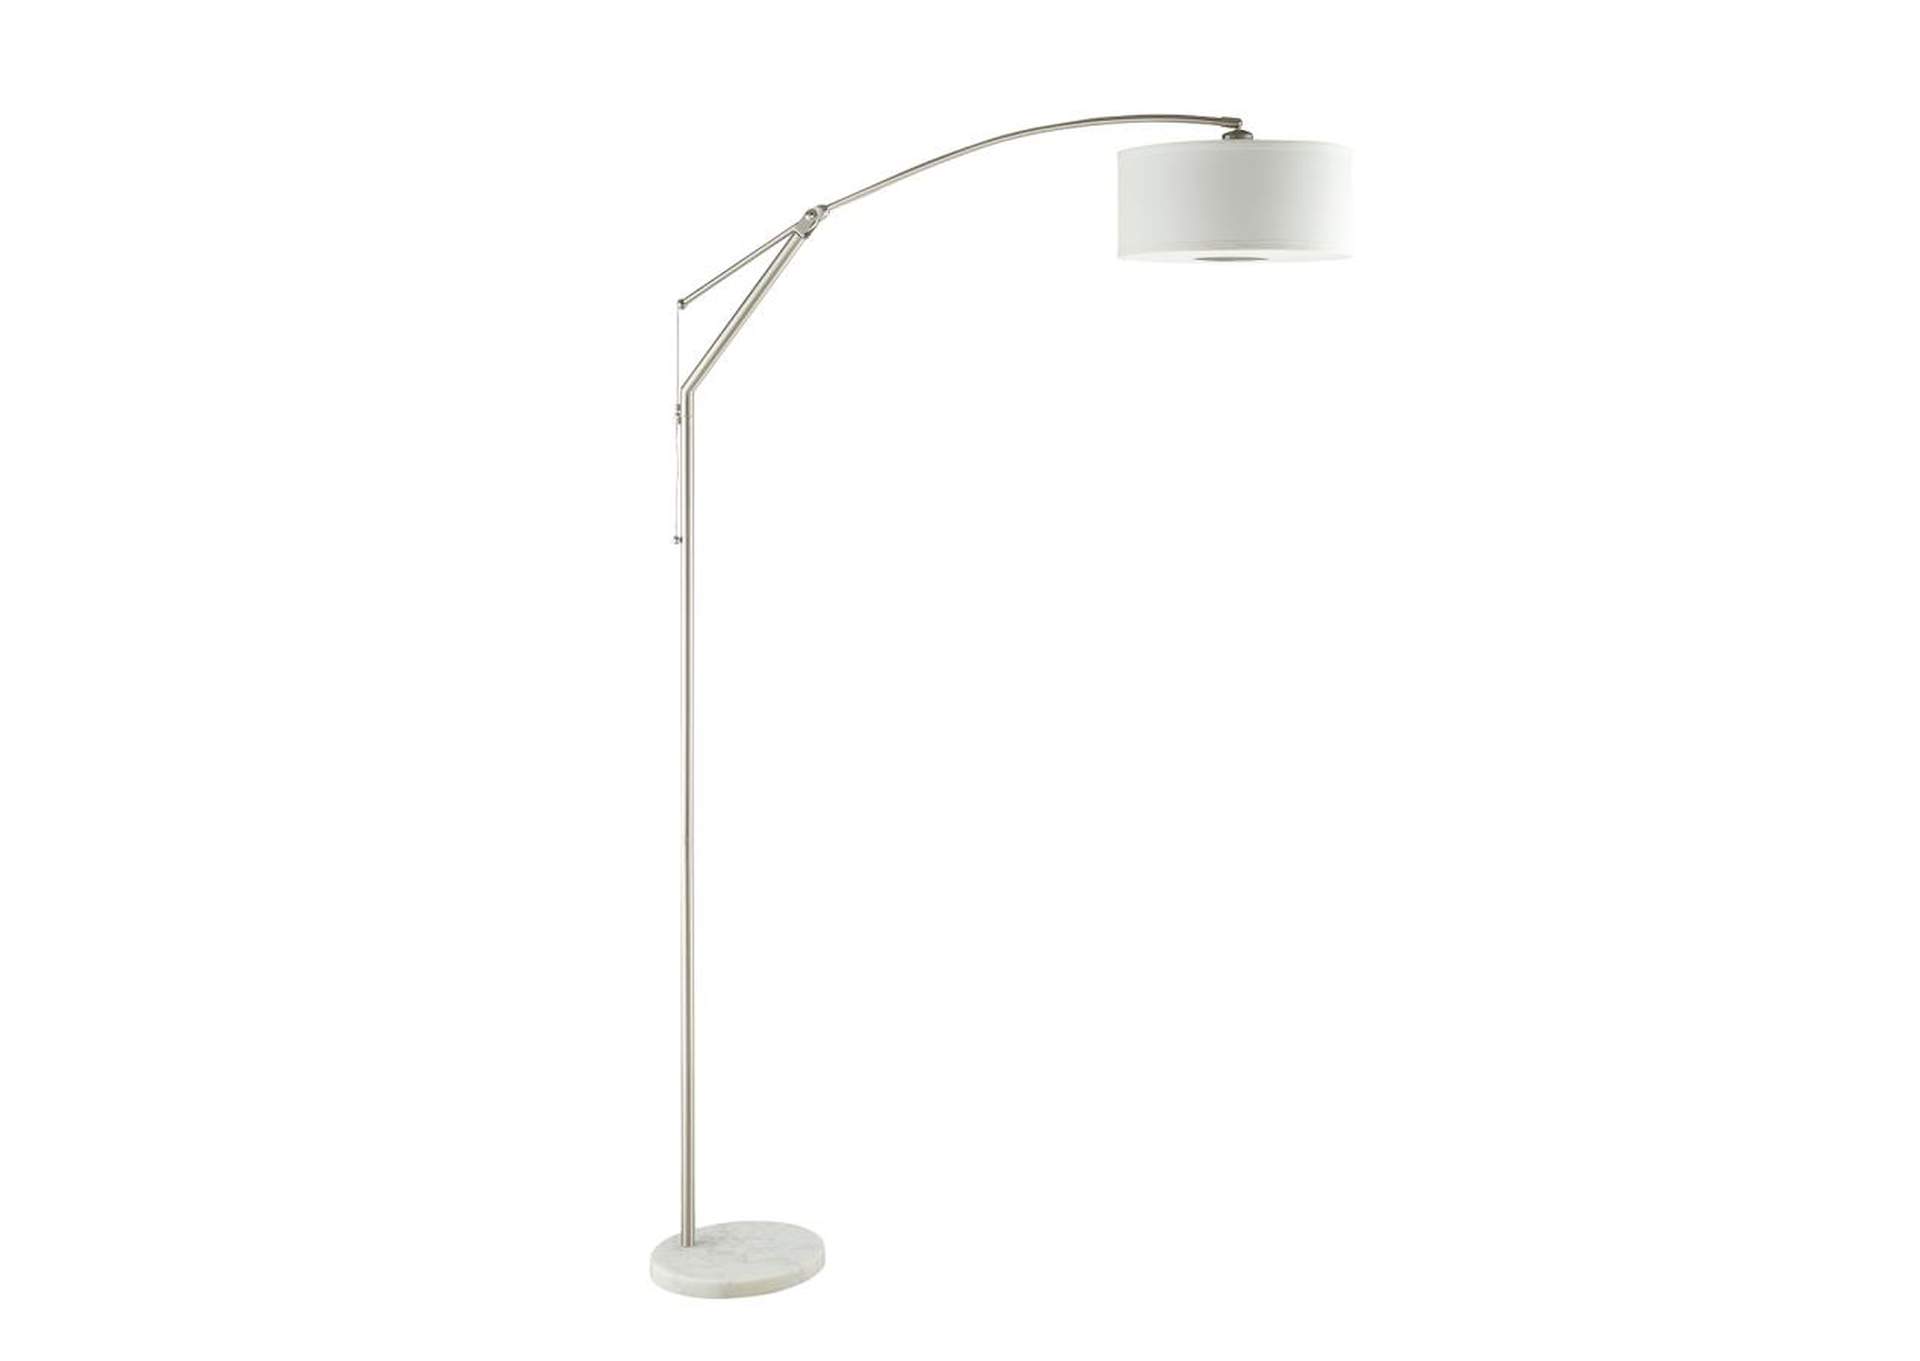 Adjustable Arched Arm Floor Lamp Chrome and White,Coaster Furniture